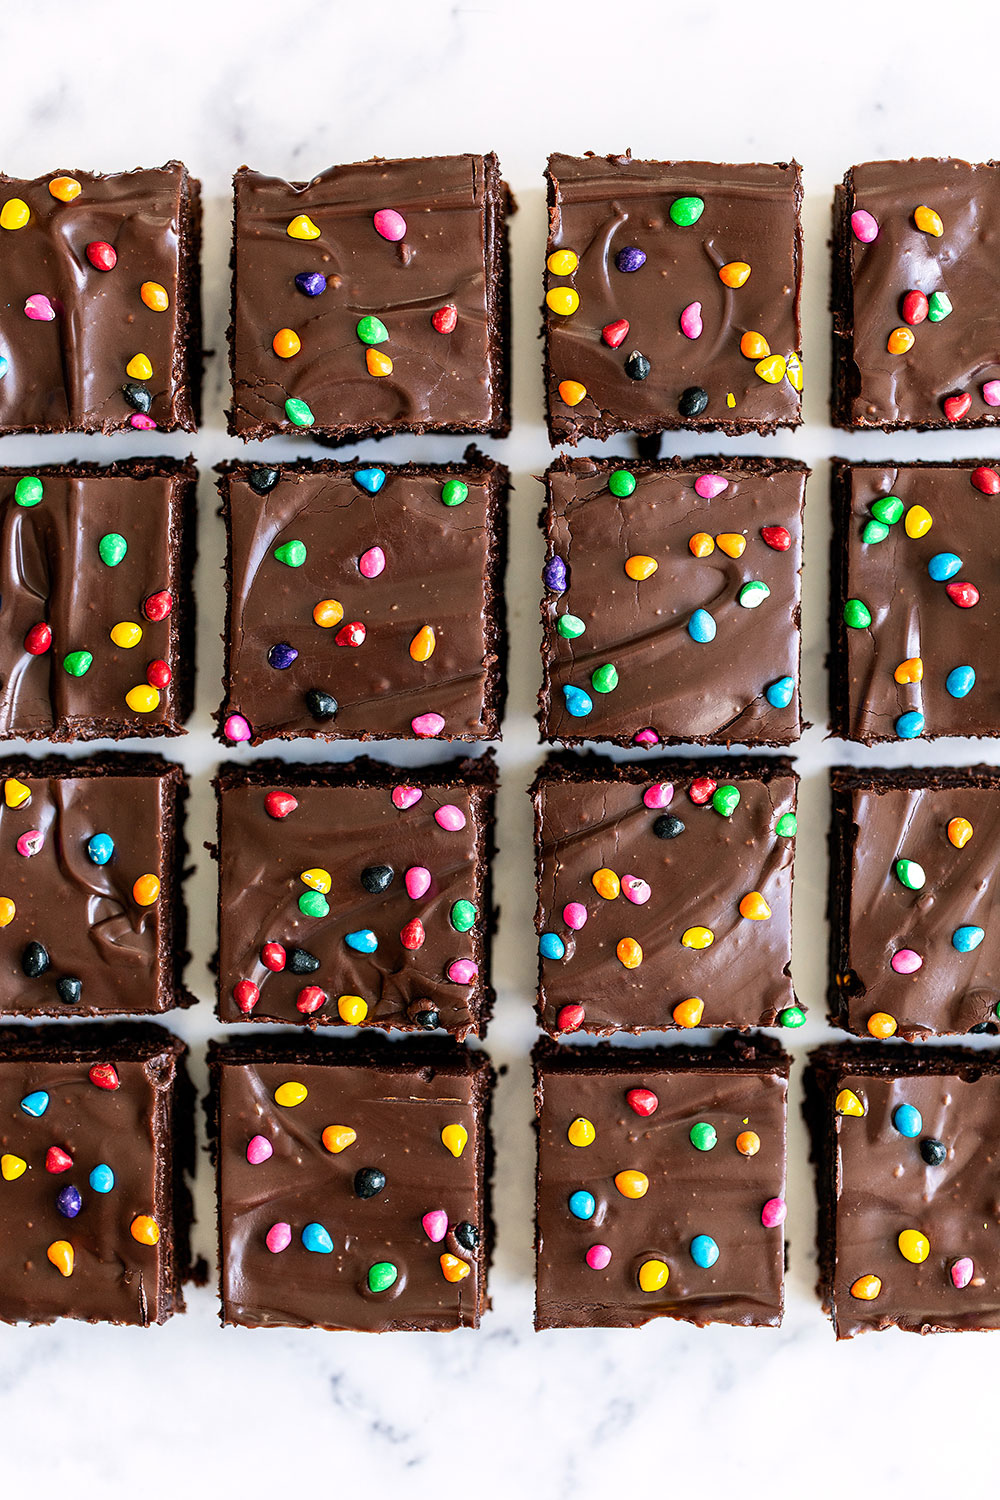 the whole batch of Cosmic Brownies, perfectly sliced into squares for serving.